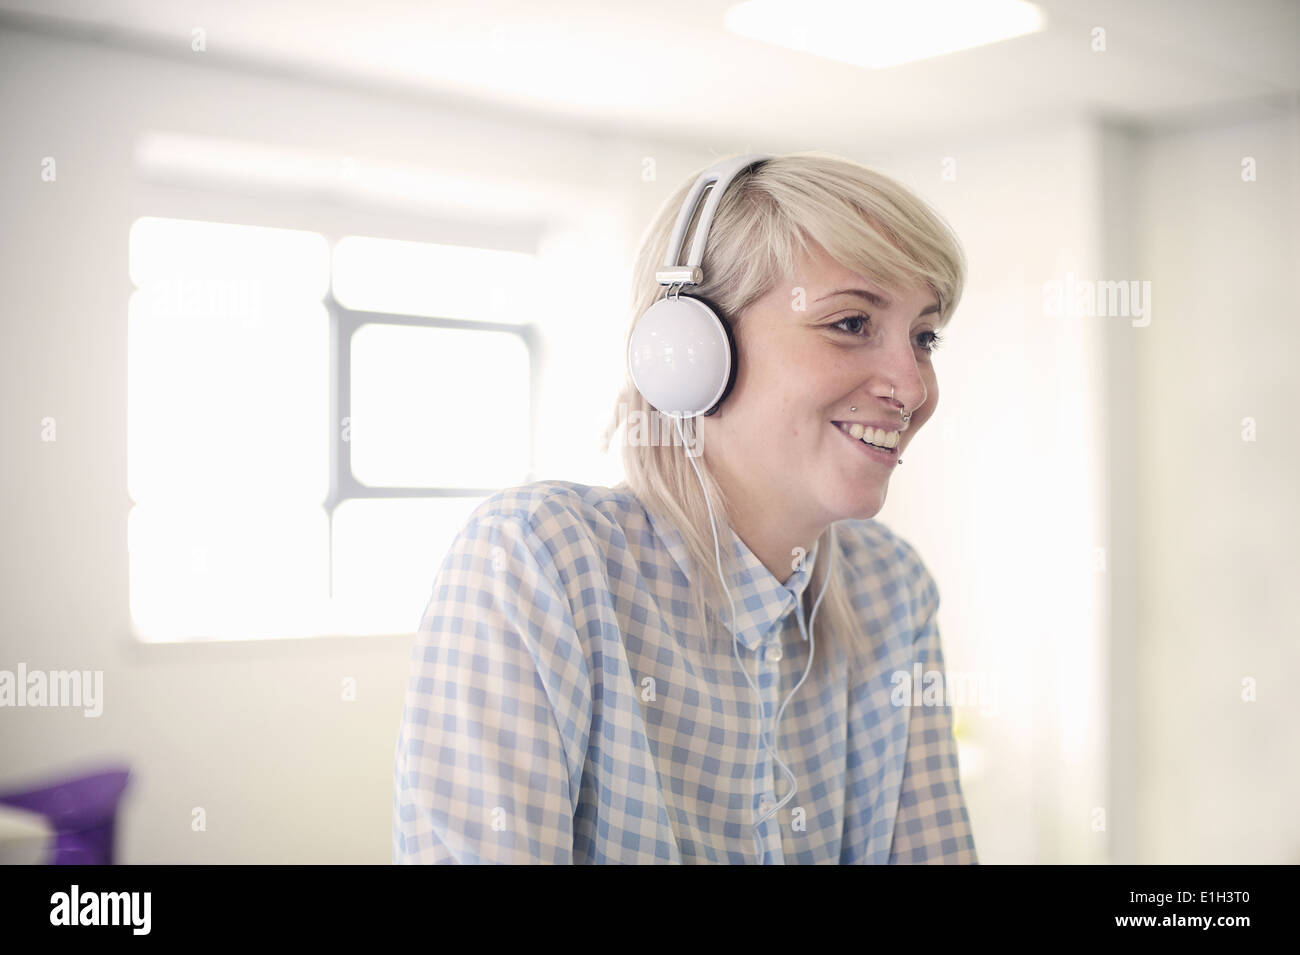 Young woman listening to headphones Stock Photo